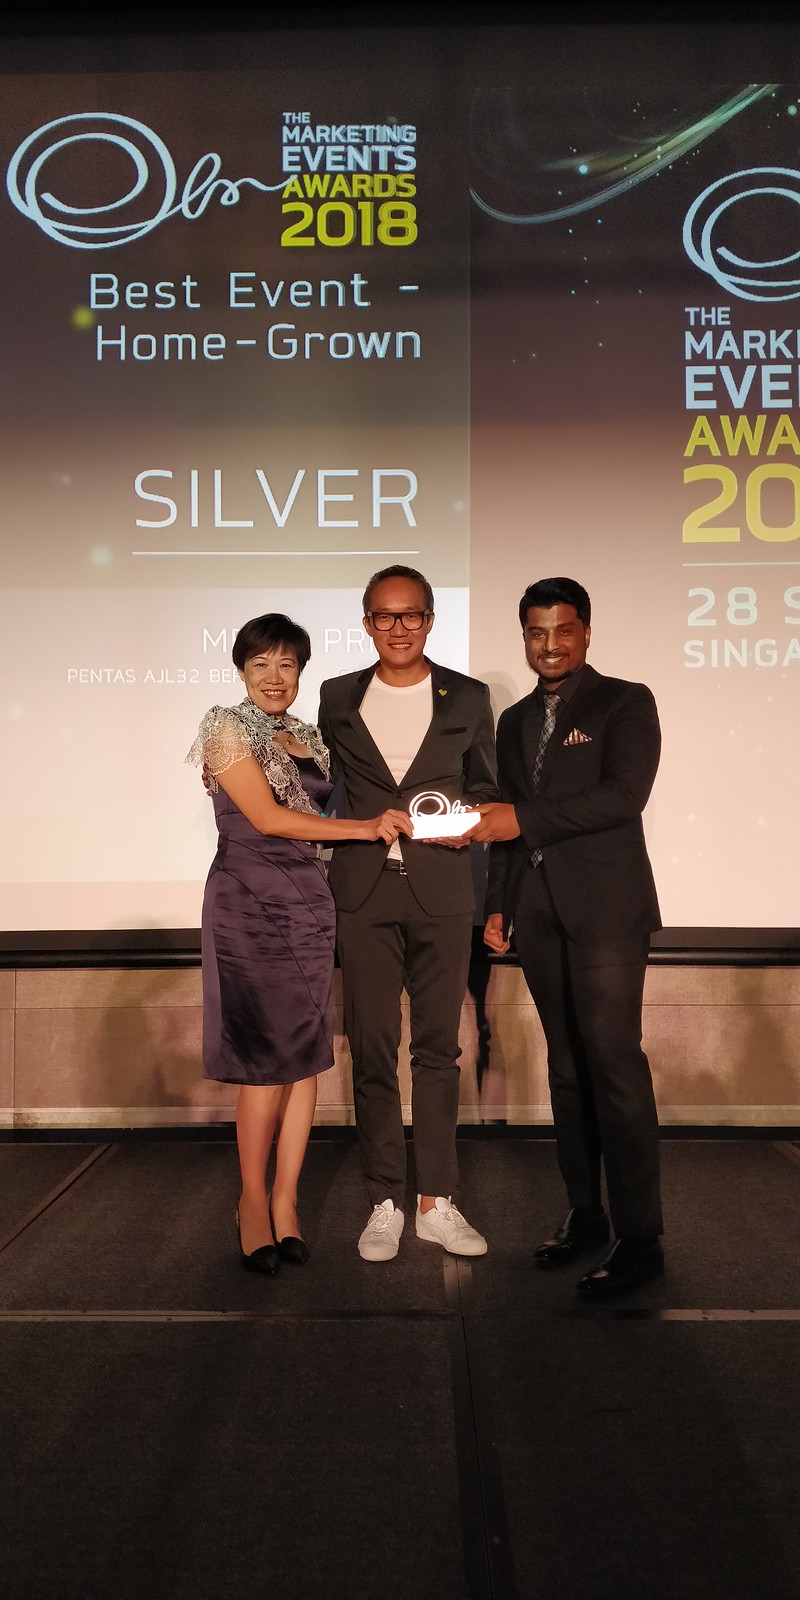 MEDIA PRIMA BAGS FOUR TROPHIES AT THE MARKETING EVENTS AWARDS 2018